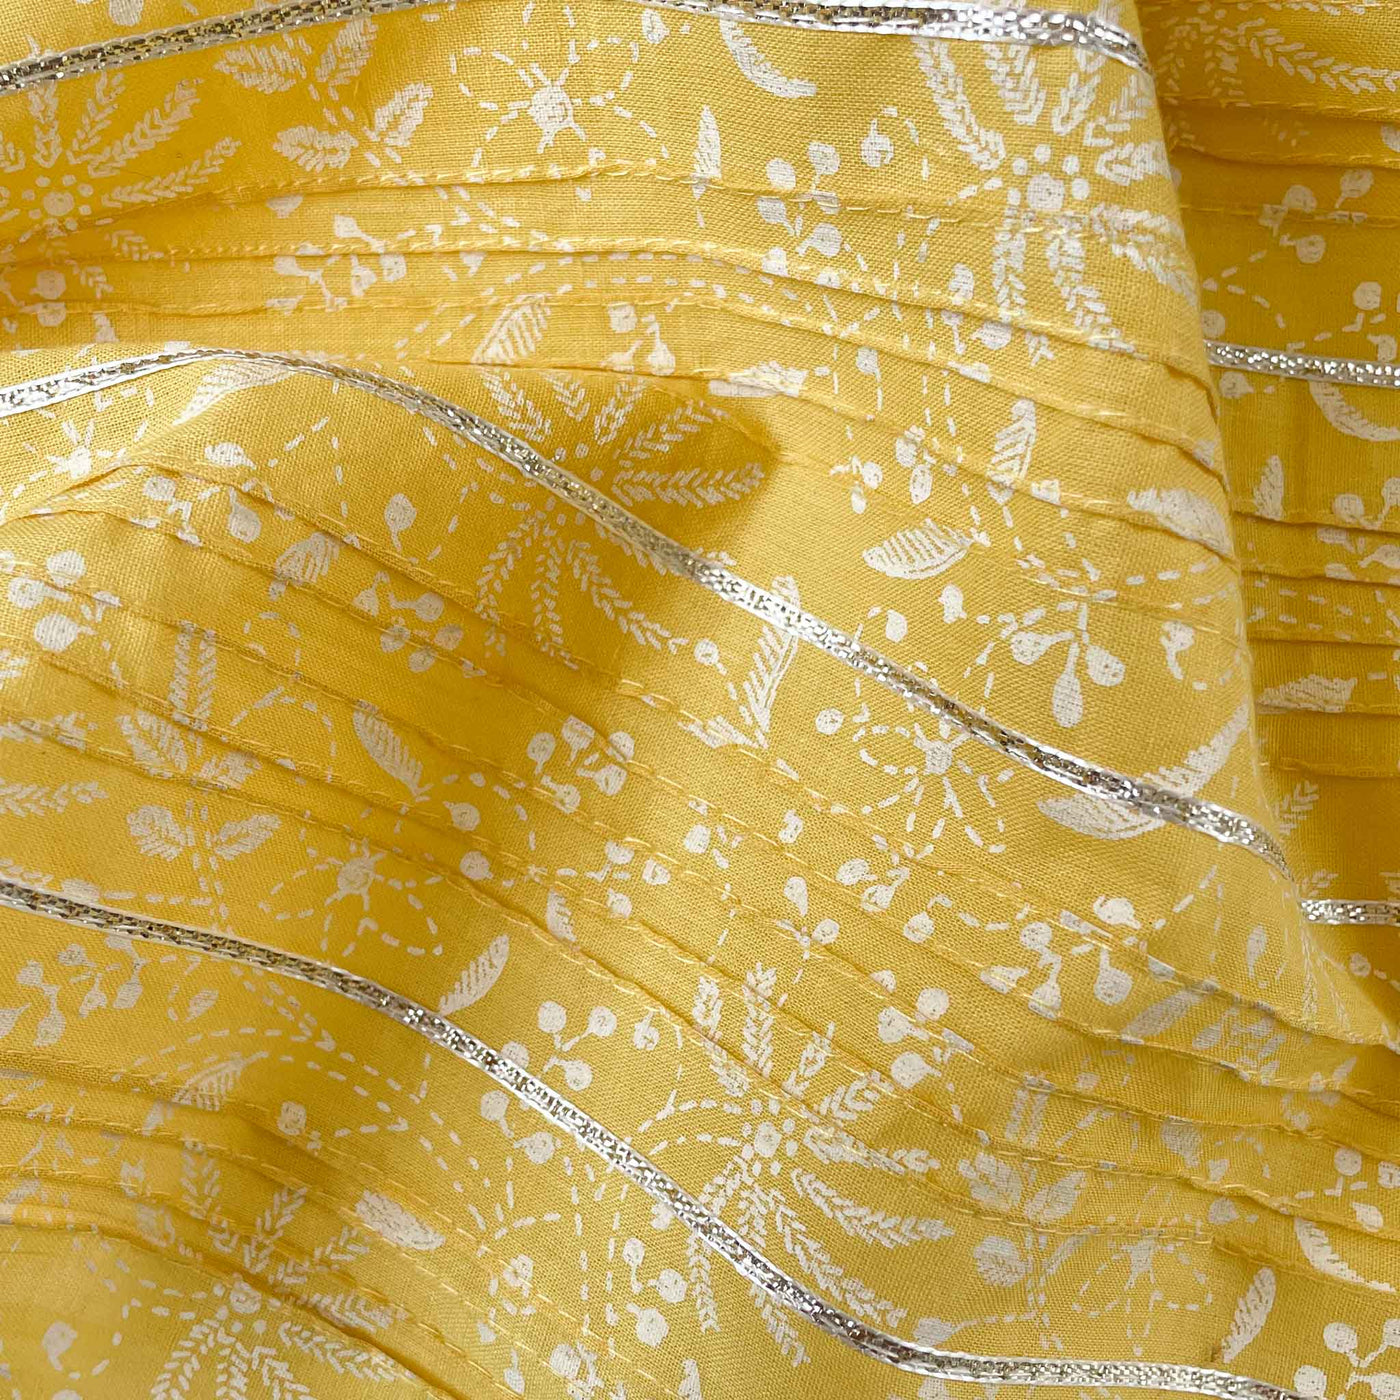 Fabric Pandit Fabric Yellow & White Floral Pintucks with Gota Patti Hand Block Printed Pure Cotton Fabric (Width 36 inches)